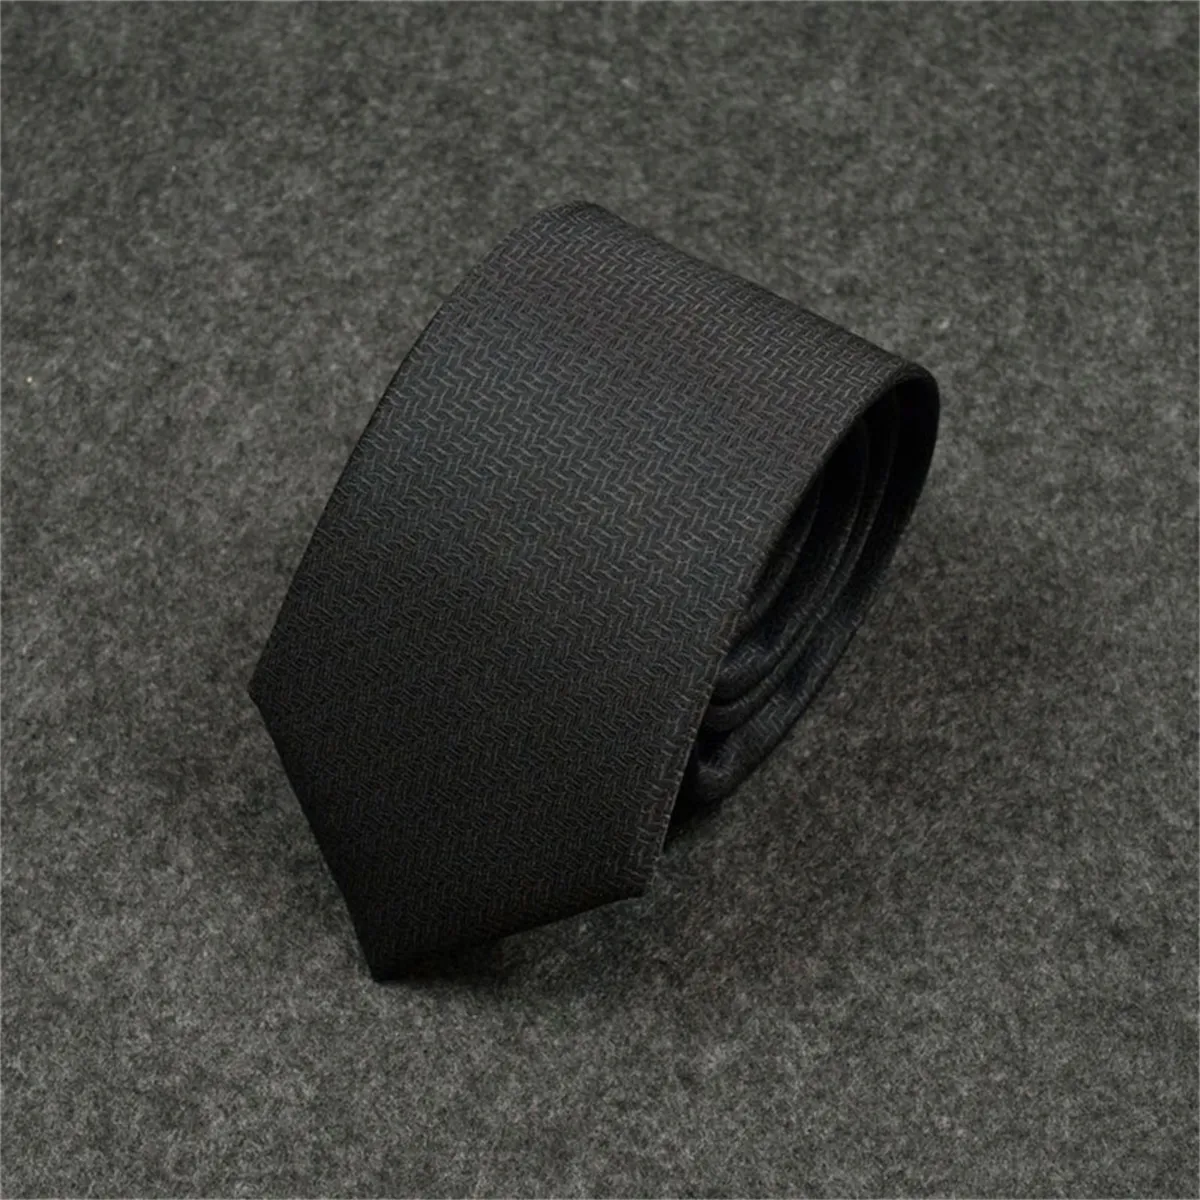 H2023 New Men Ties Fashion Silk Tie 100% Designer Necktie Jacquard Classic Woven Handmade for Wedding Casual and Business Neckties with Original Box 6hh96